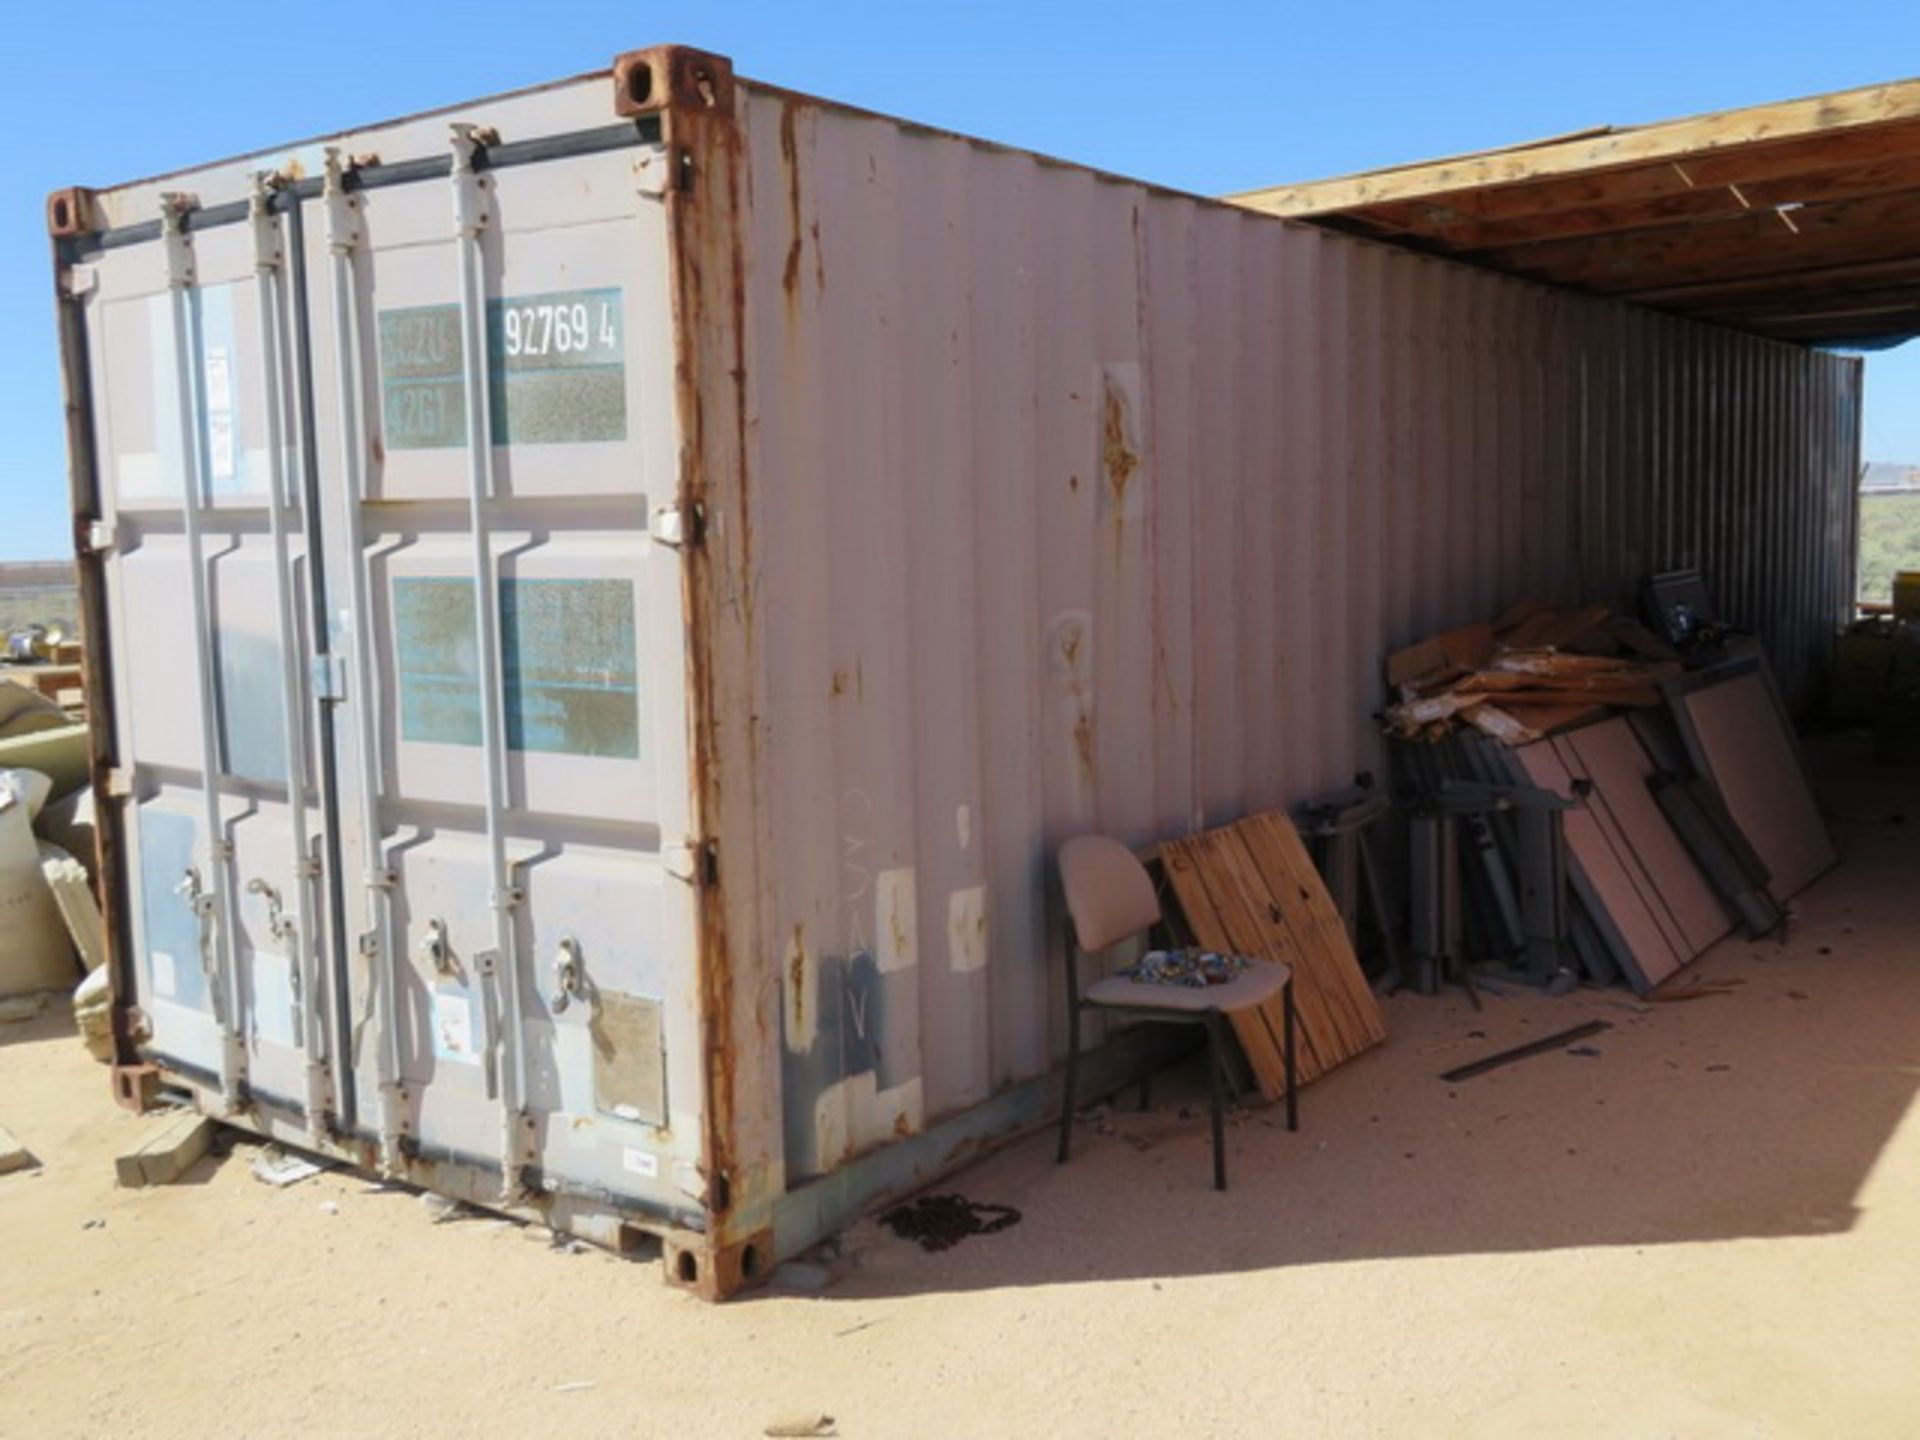 Xinhui CIMC Container Co. 1AA-147GC40 Shipping Container, 40' x 8' x 102"H, 2,389 Cu.Ft, 7,940 LBS - Image 4 of 6